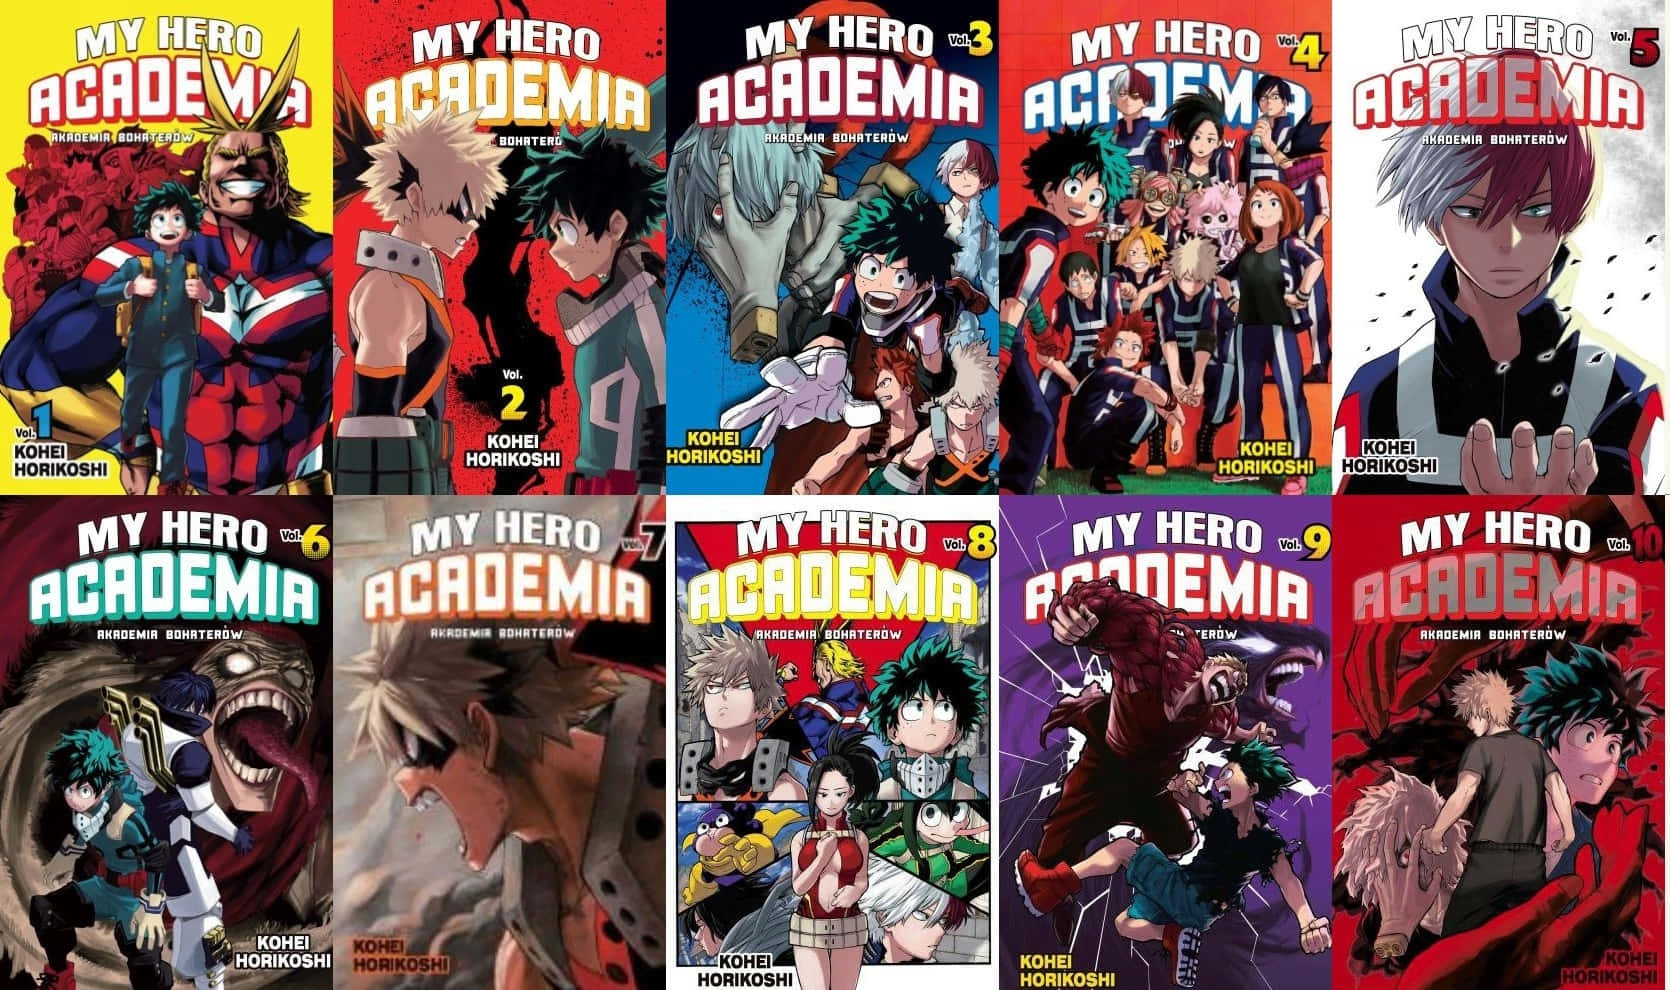 All Might stands tall and proud beside a determined young Midoriya, inspiring a new generation of heroes in the Bnha world.